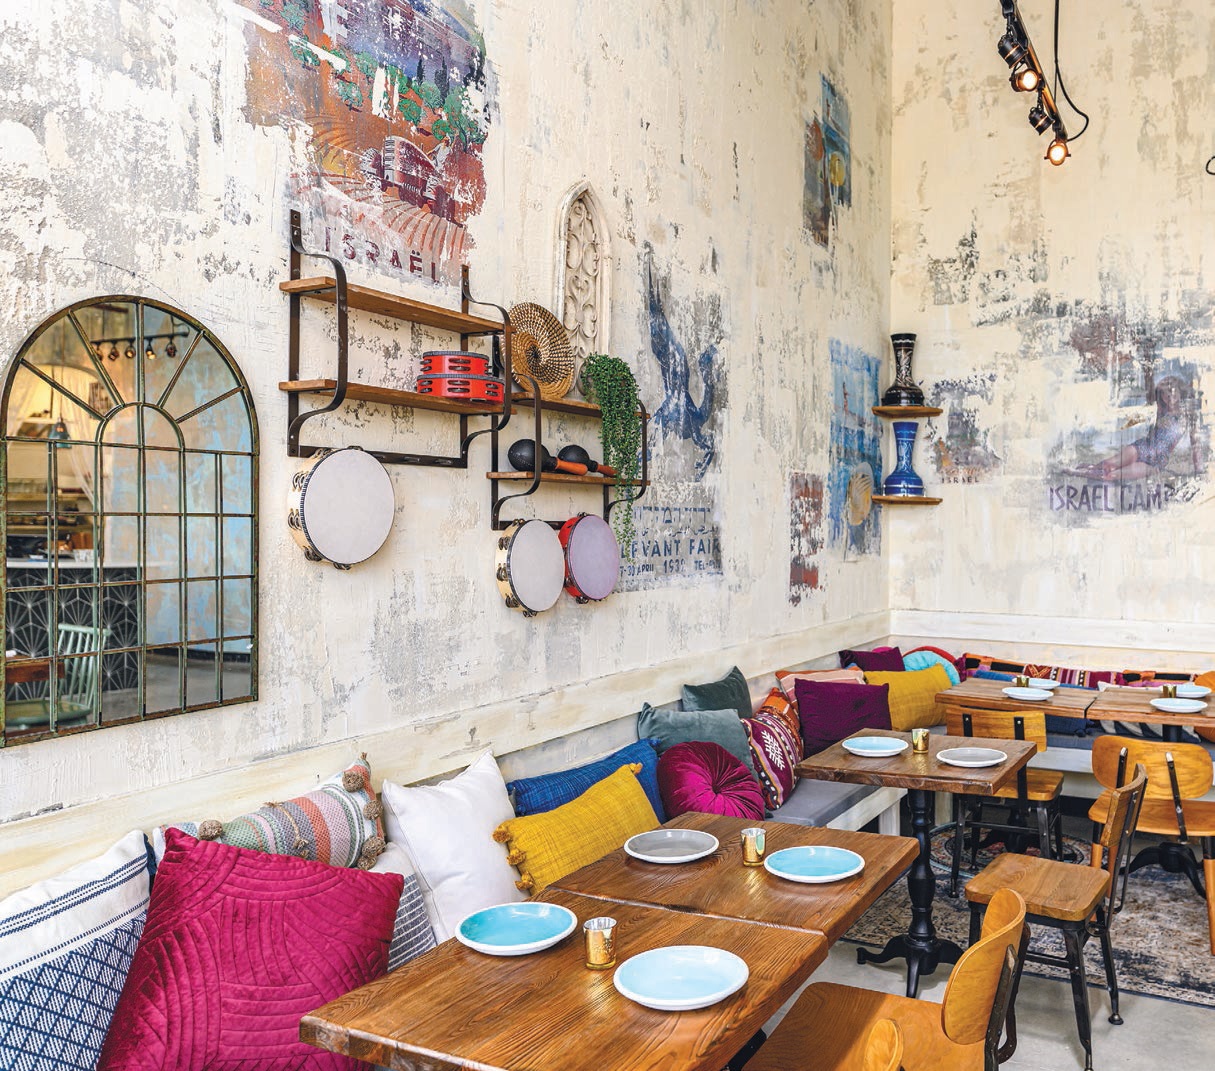 Jaffa’s gorgeous interior design pays homage to its Israeli roots, boasting colorful accent pillows, posters and props PHOTO BY SALAR ABUAZIZ
